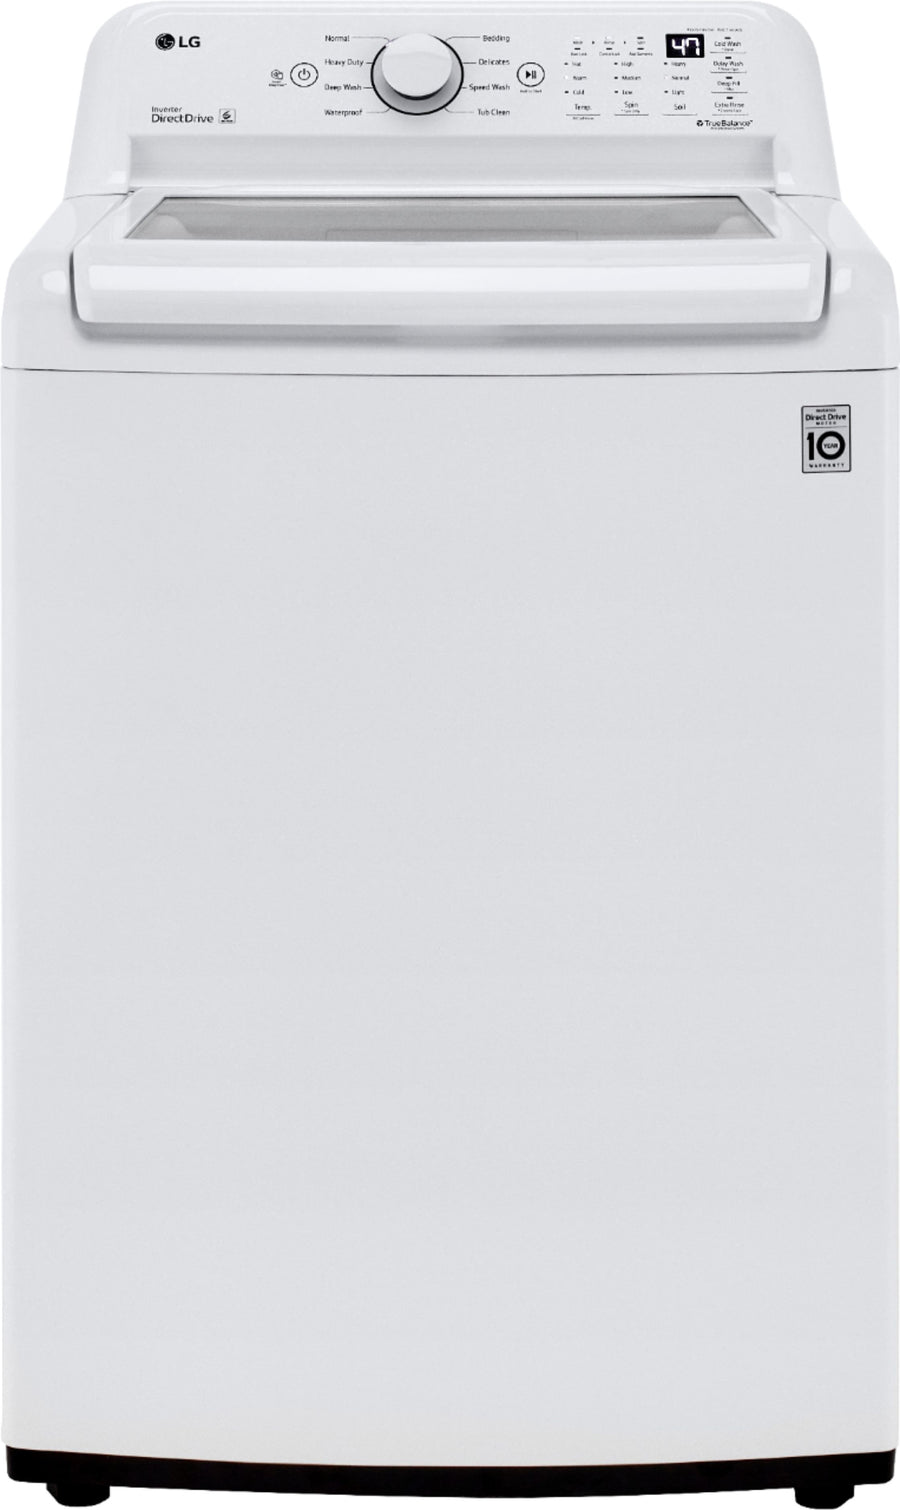 LG - 4.3 Cu. Ft. High-Efficiency Smart Top Load Washer with TurboDrum Technology - White_0